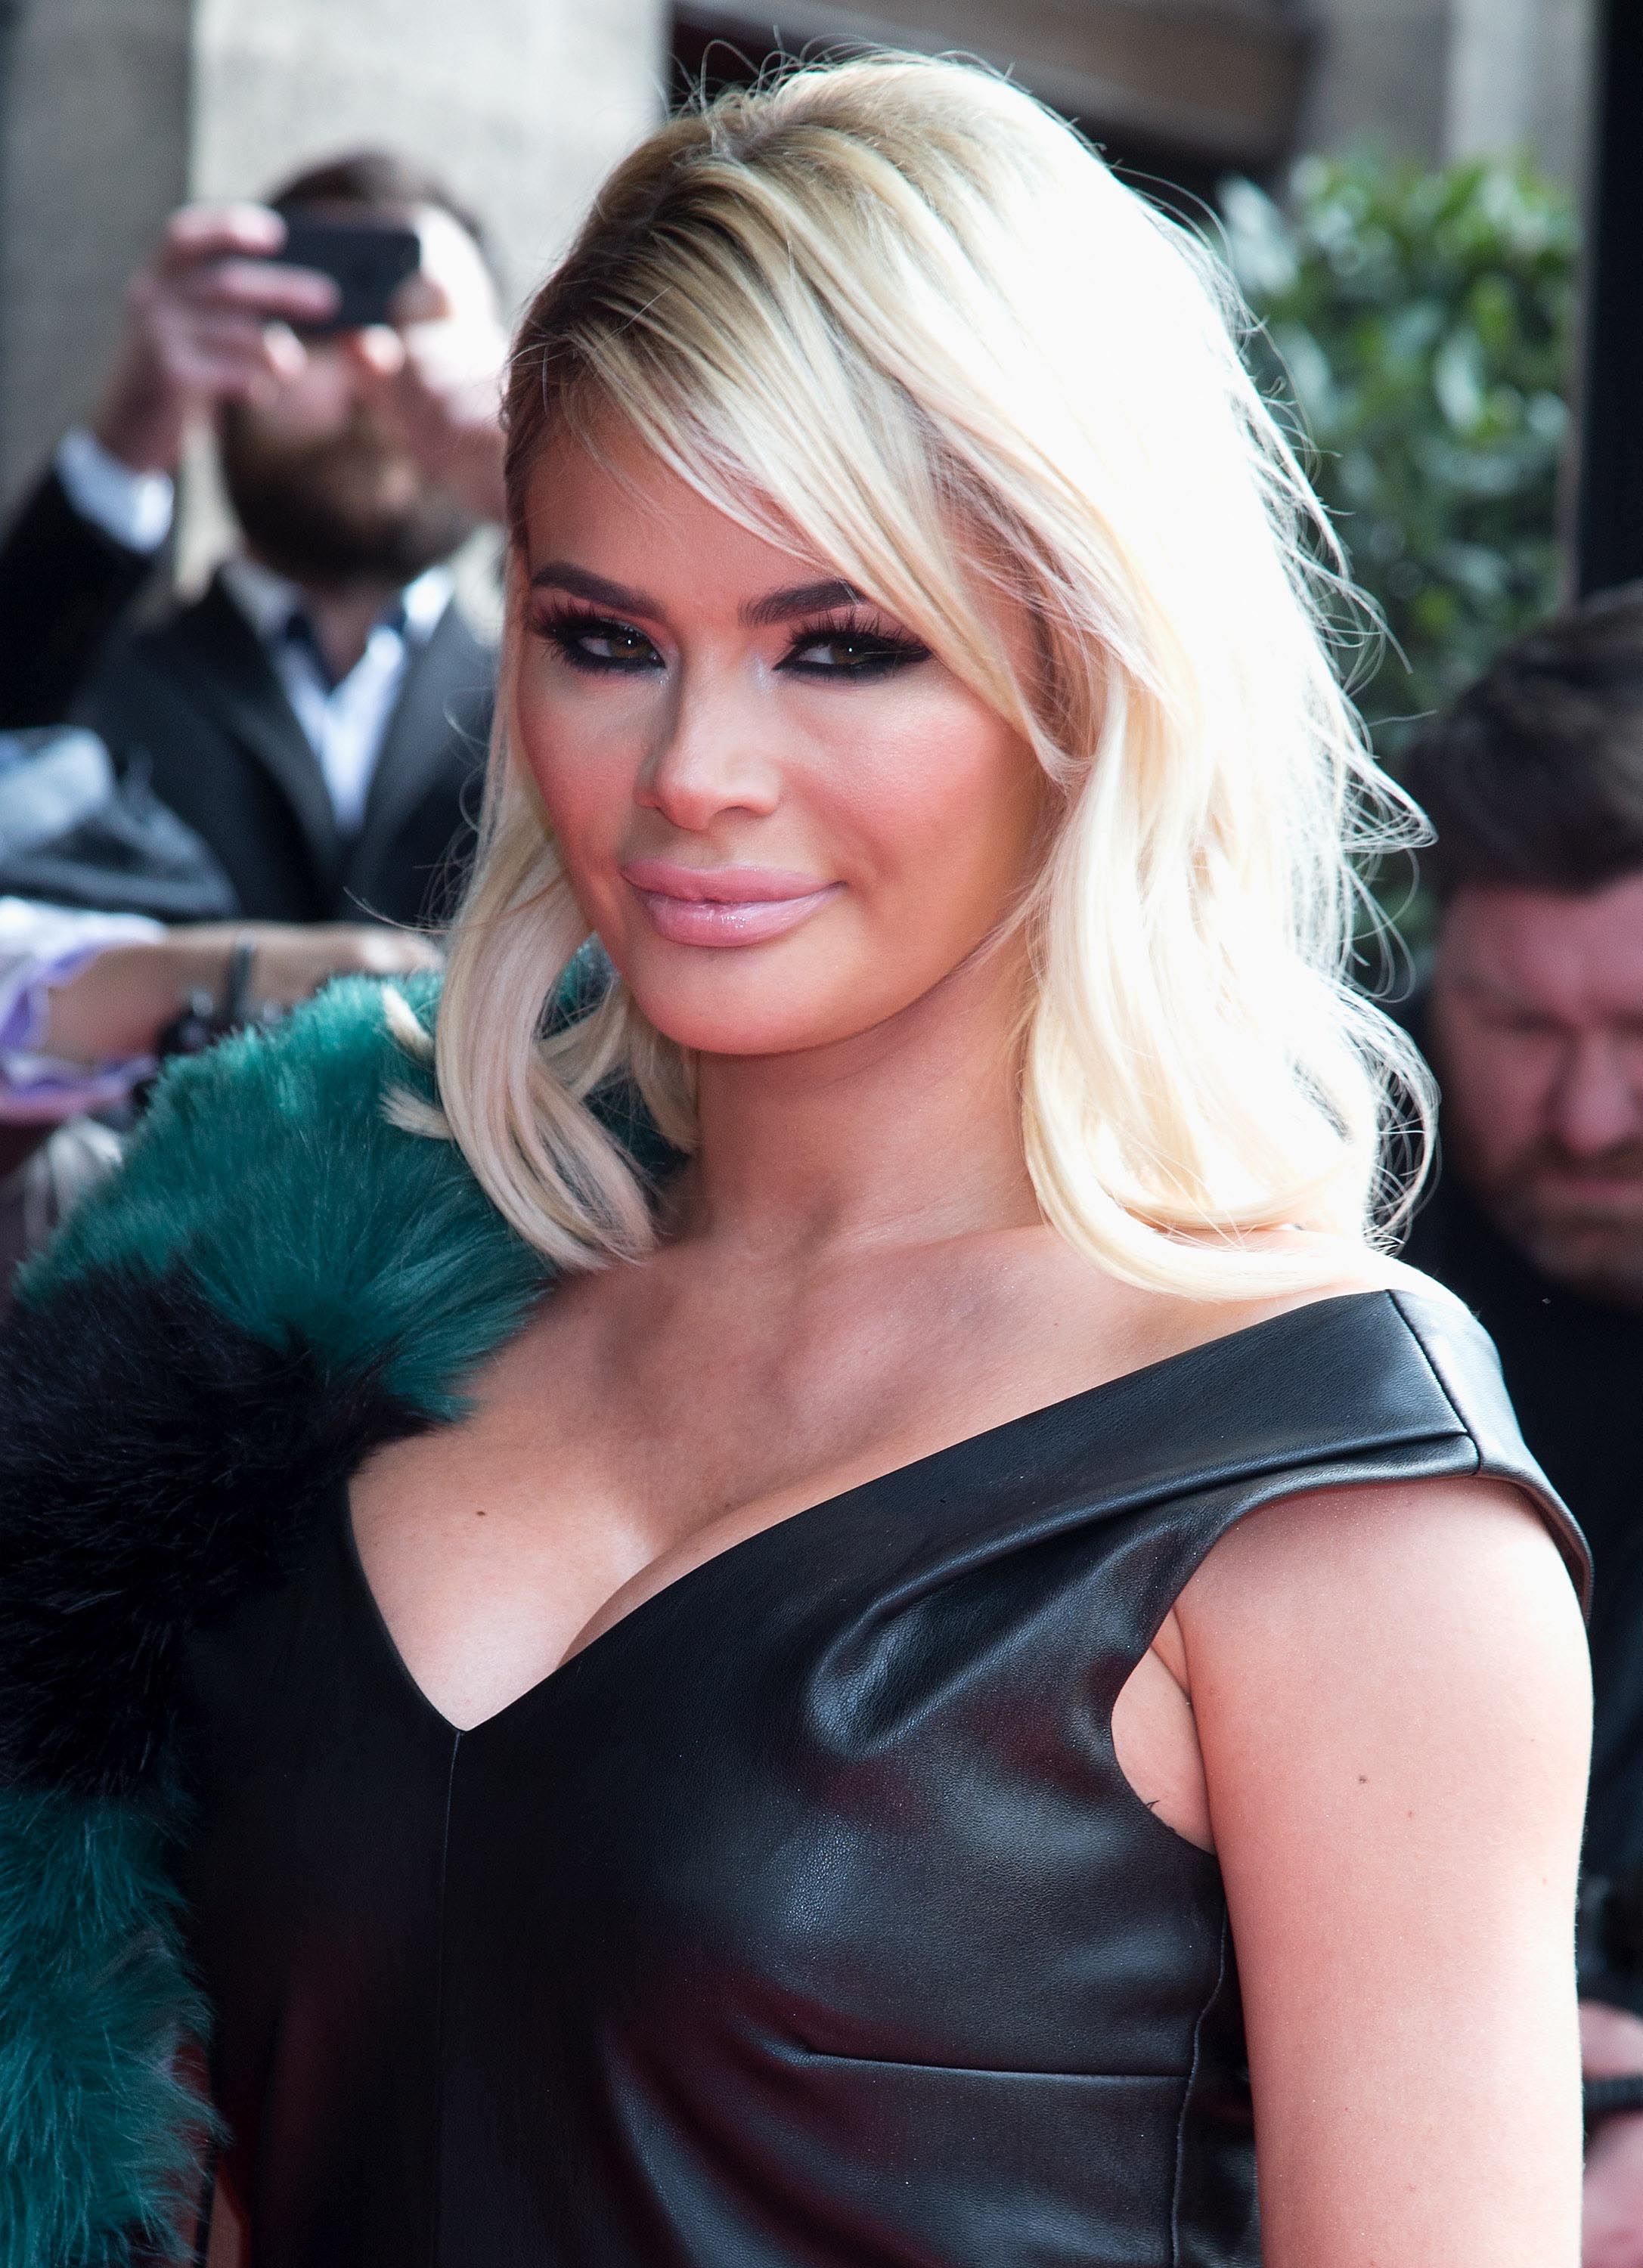 Chloe Sims attends the TRIC Awards 2017